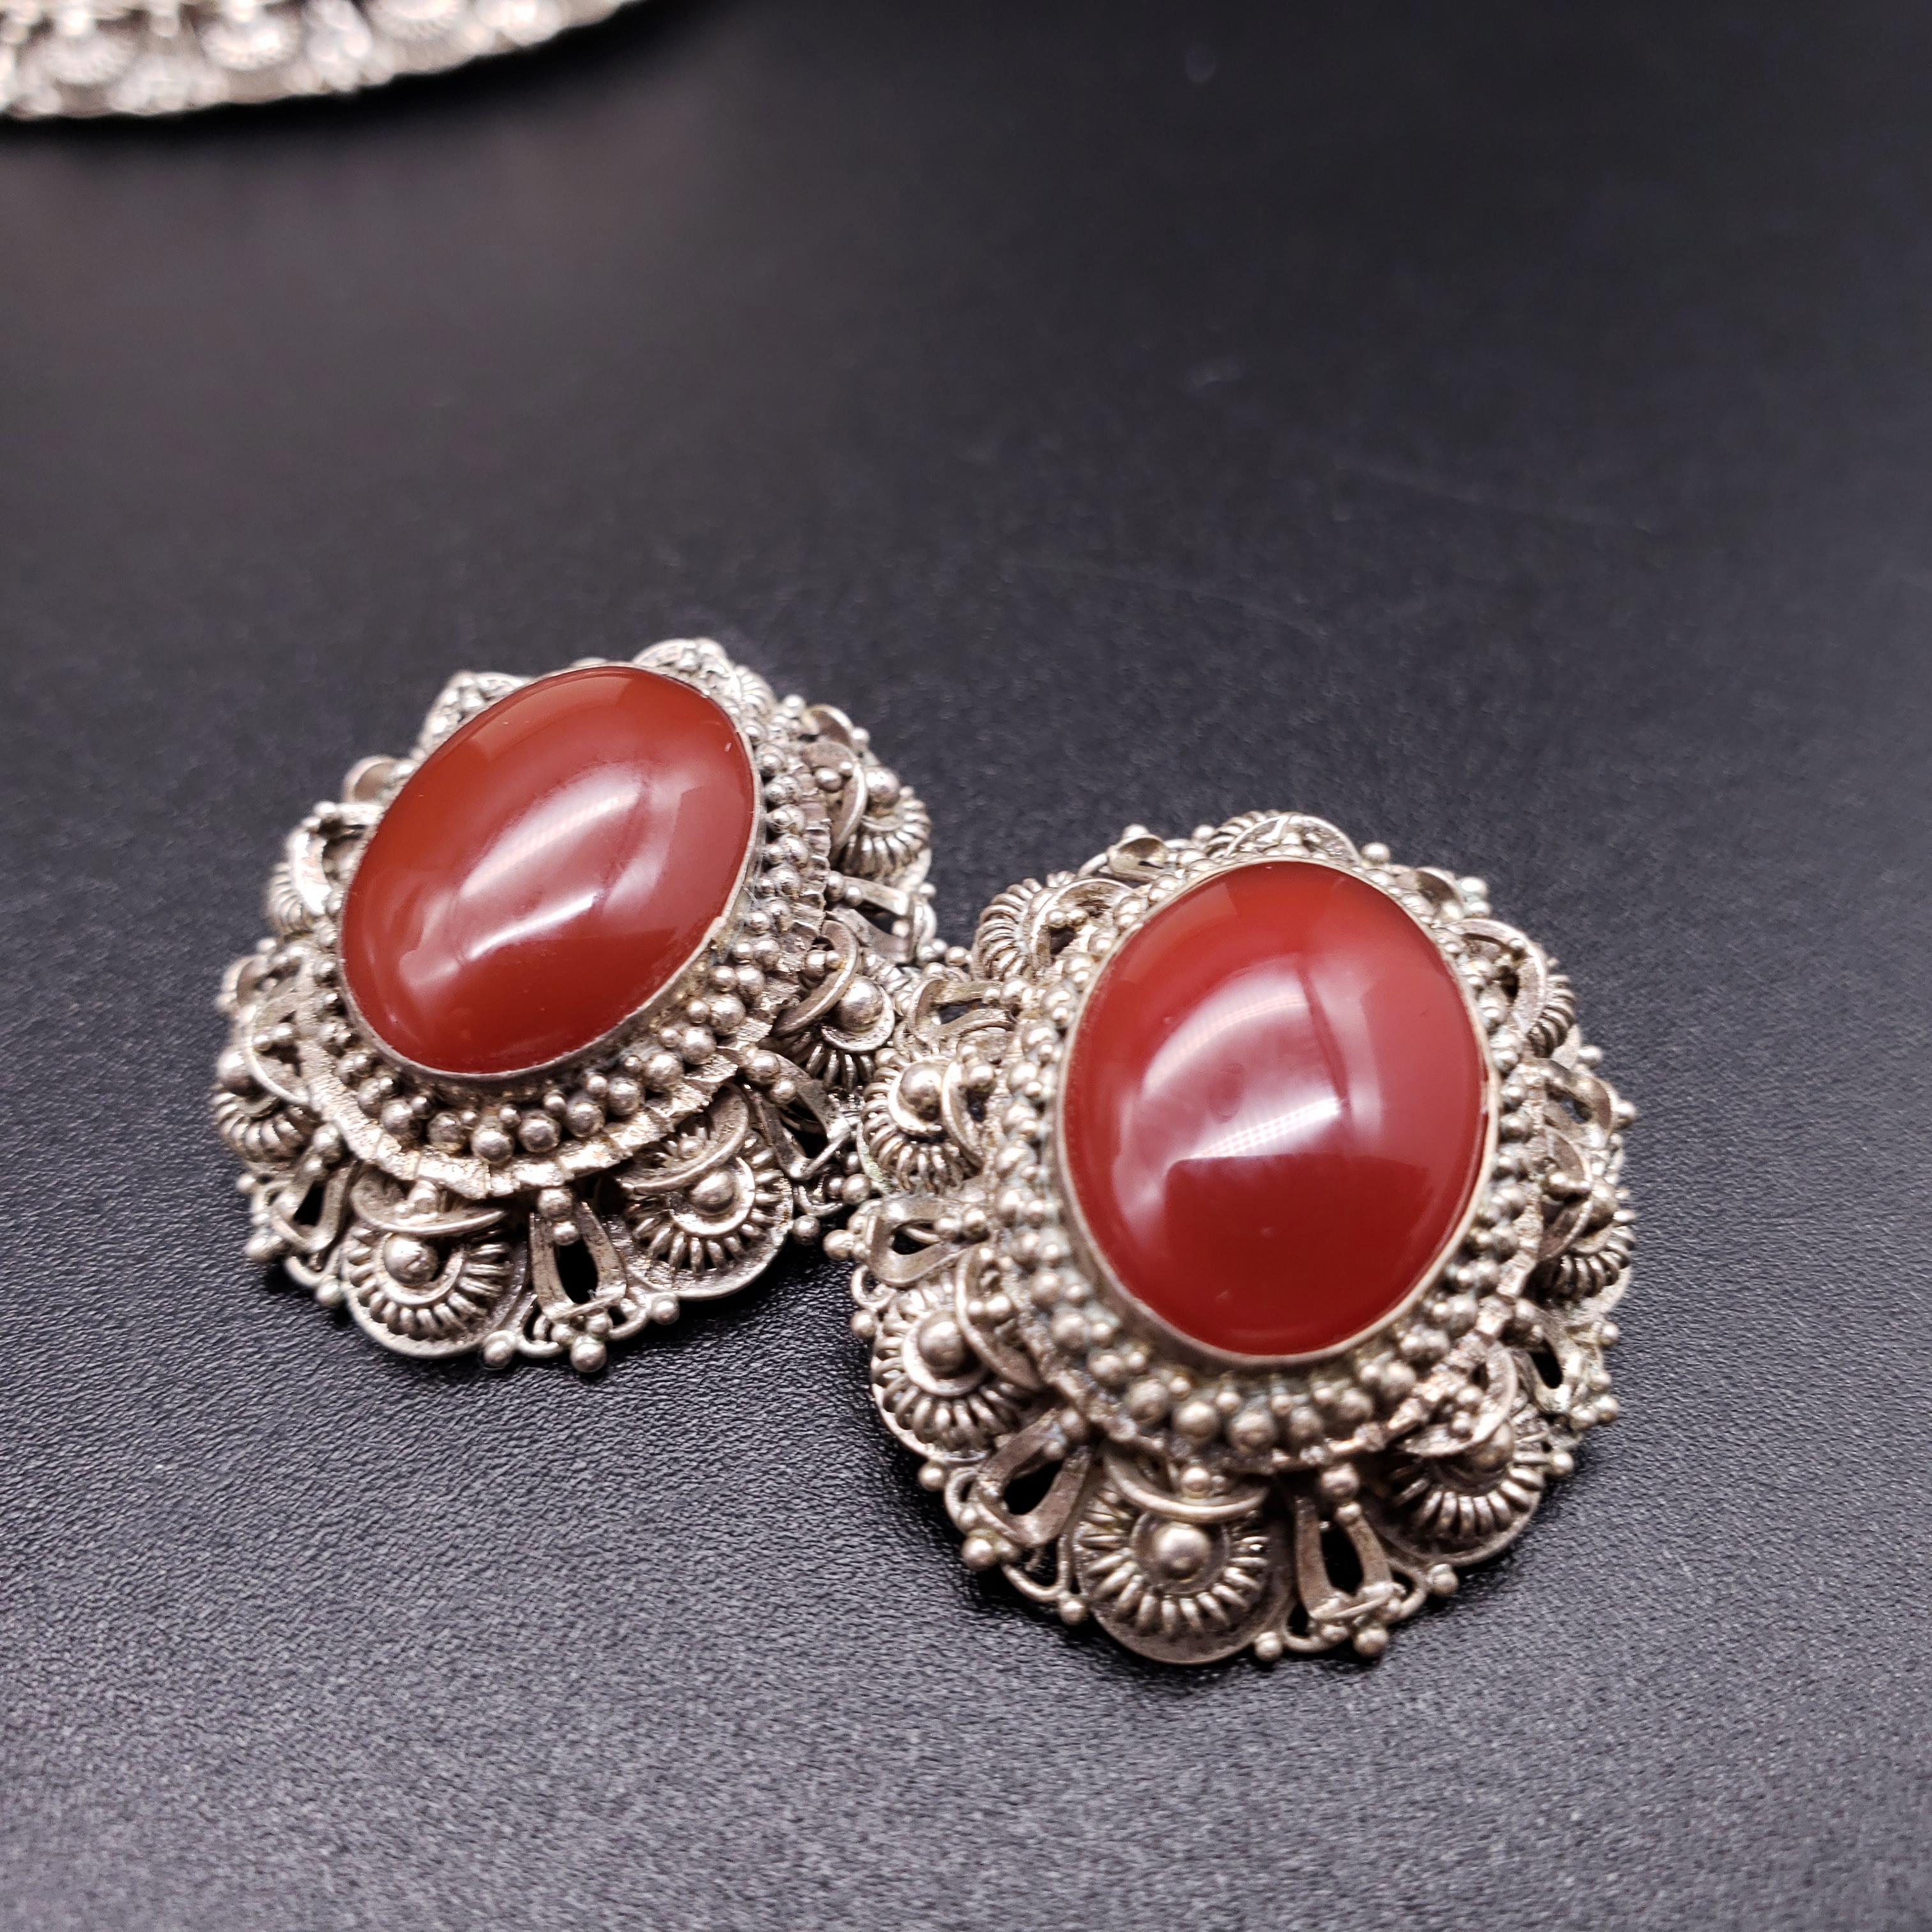 Sterling Filigree Oval Carnelian Victorian Brooch Pendant and Clip on Earrings For Sale 2